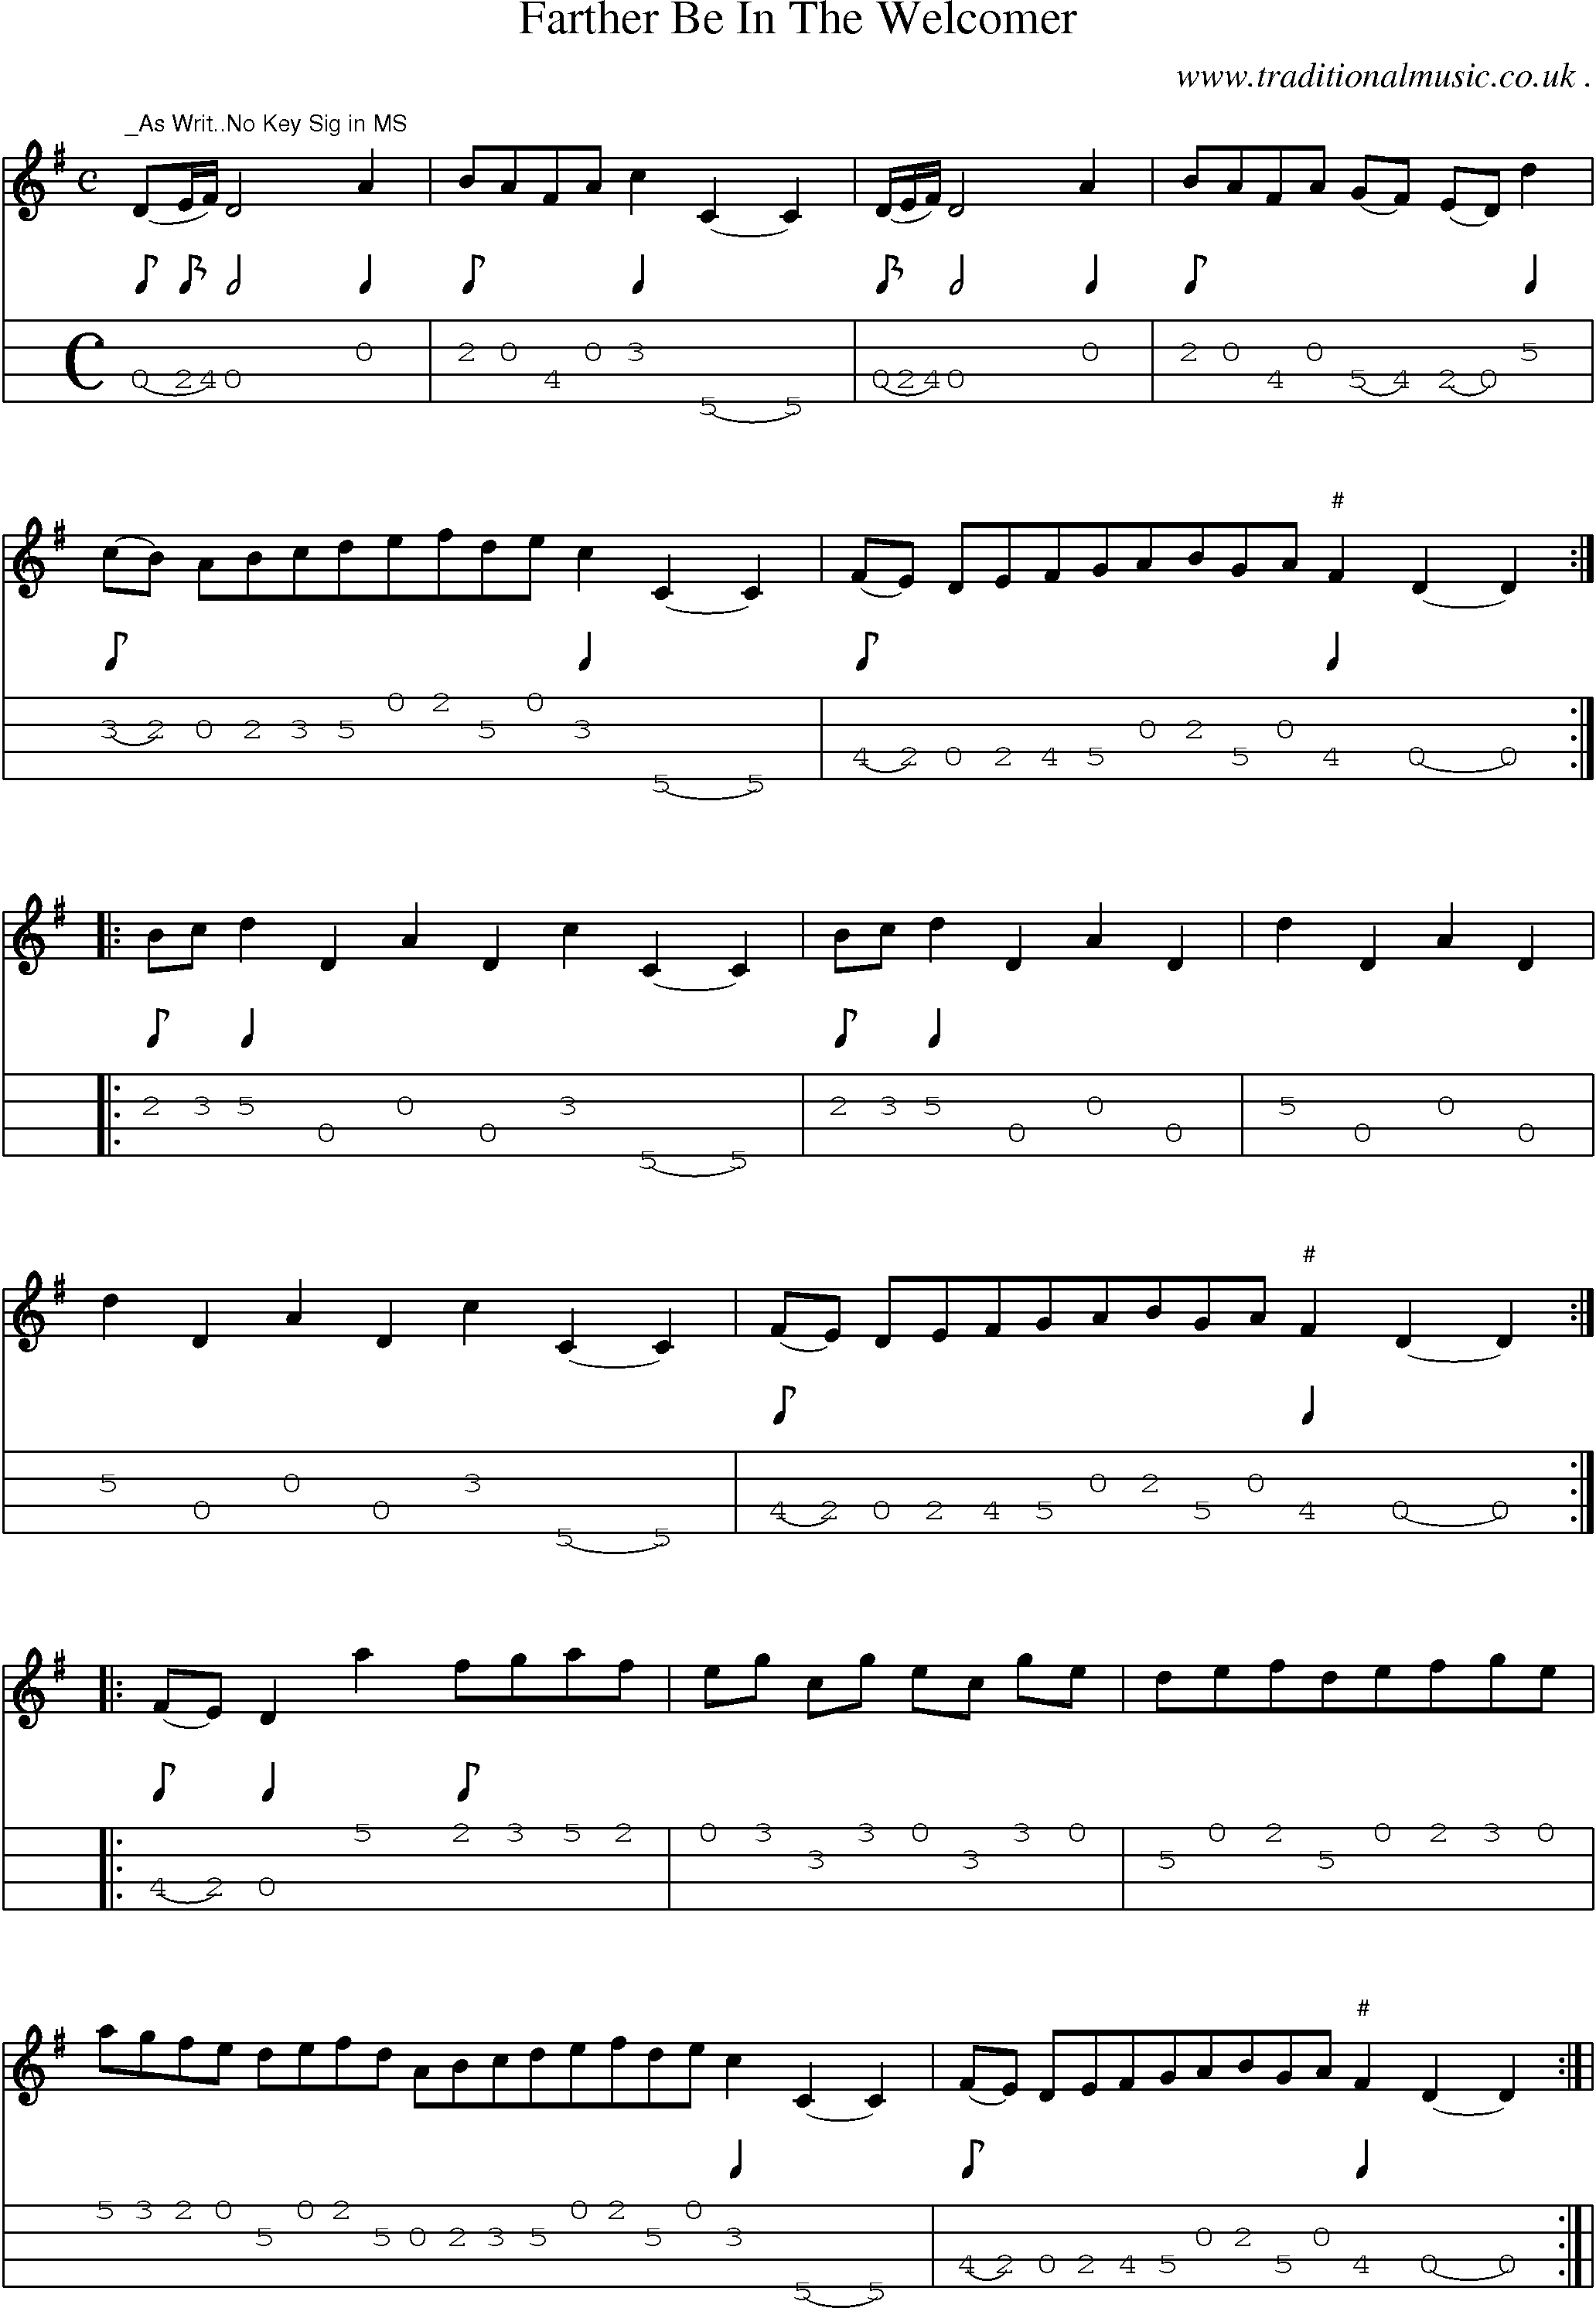 Sheet-Music and Mandolin Tabs for Farther Be In The Welcomer